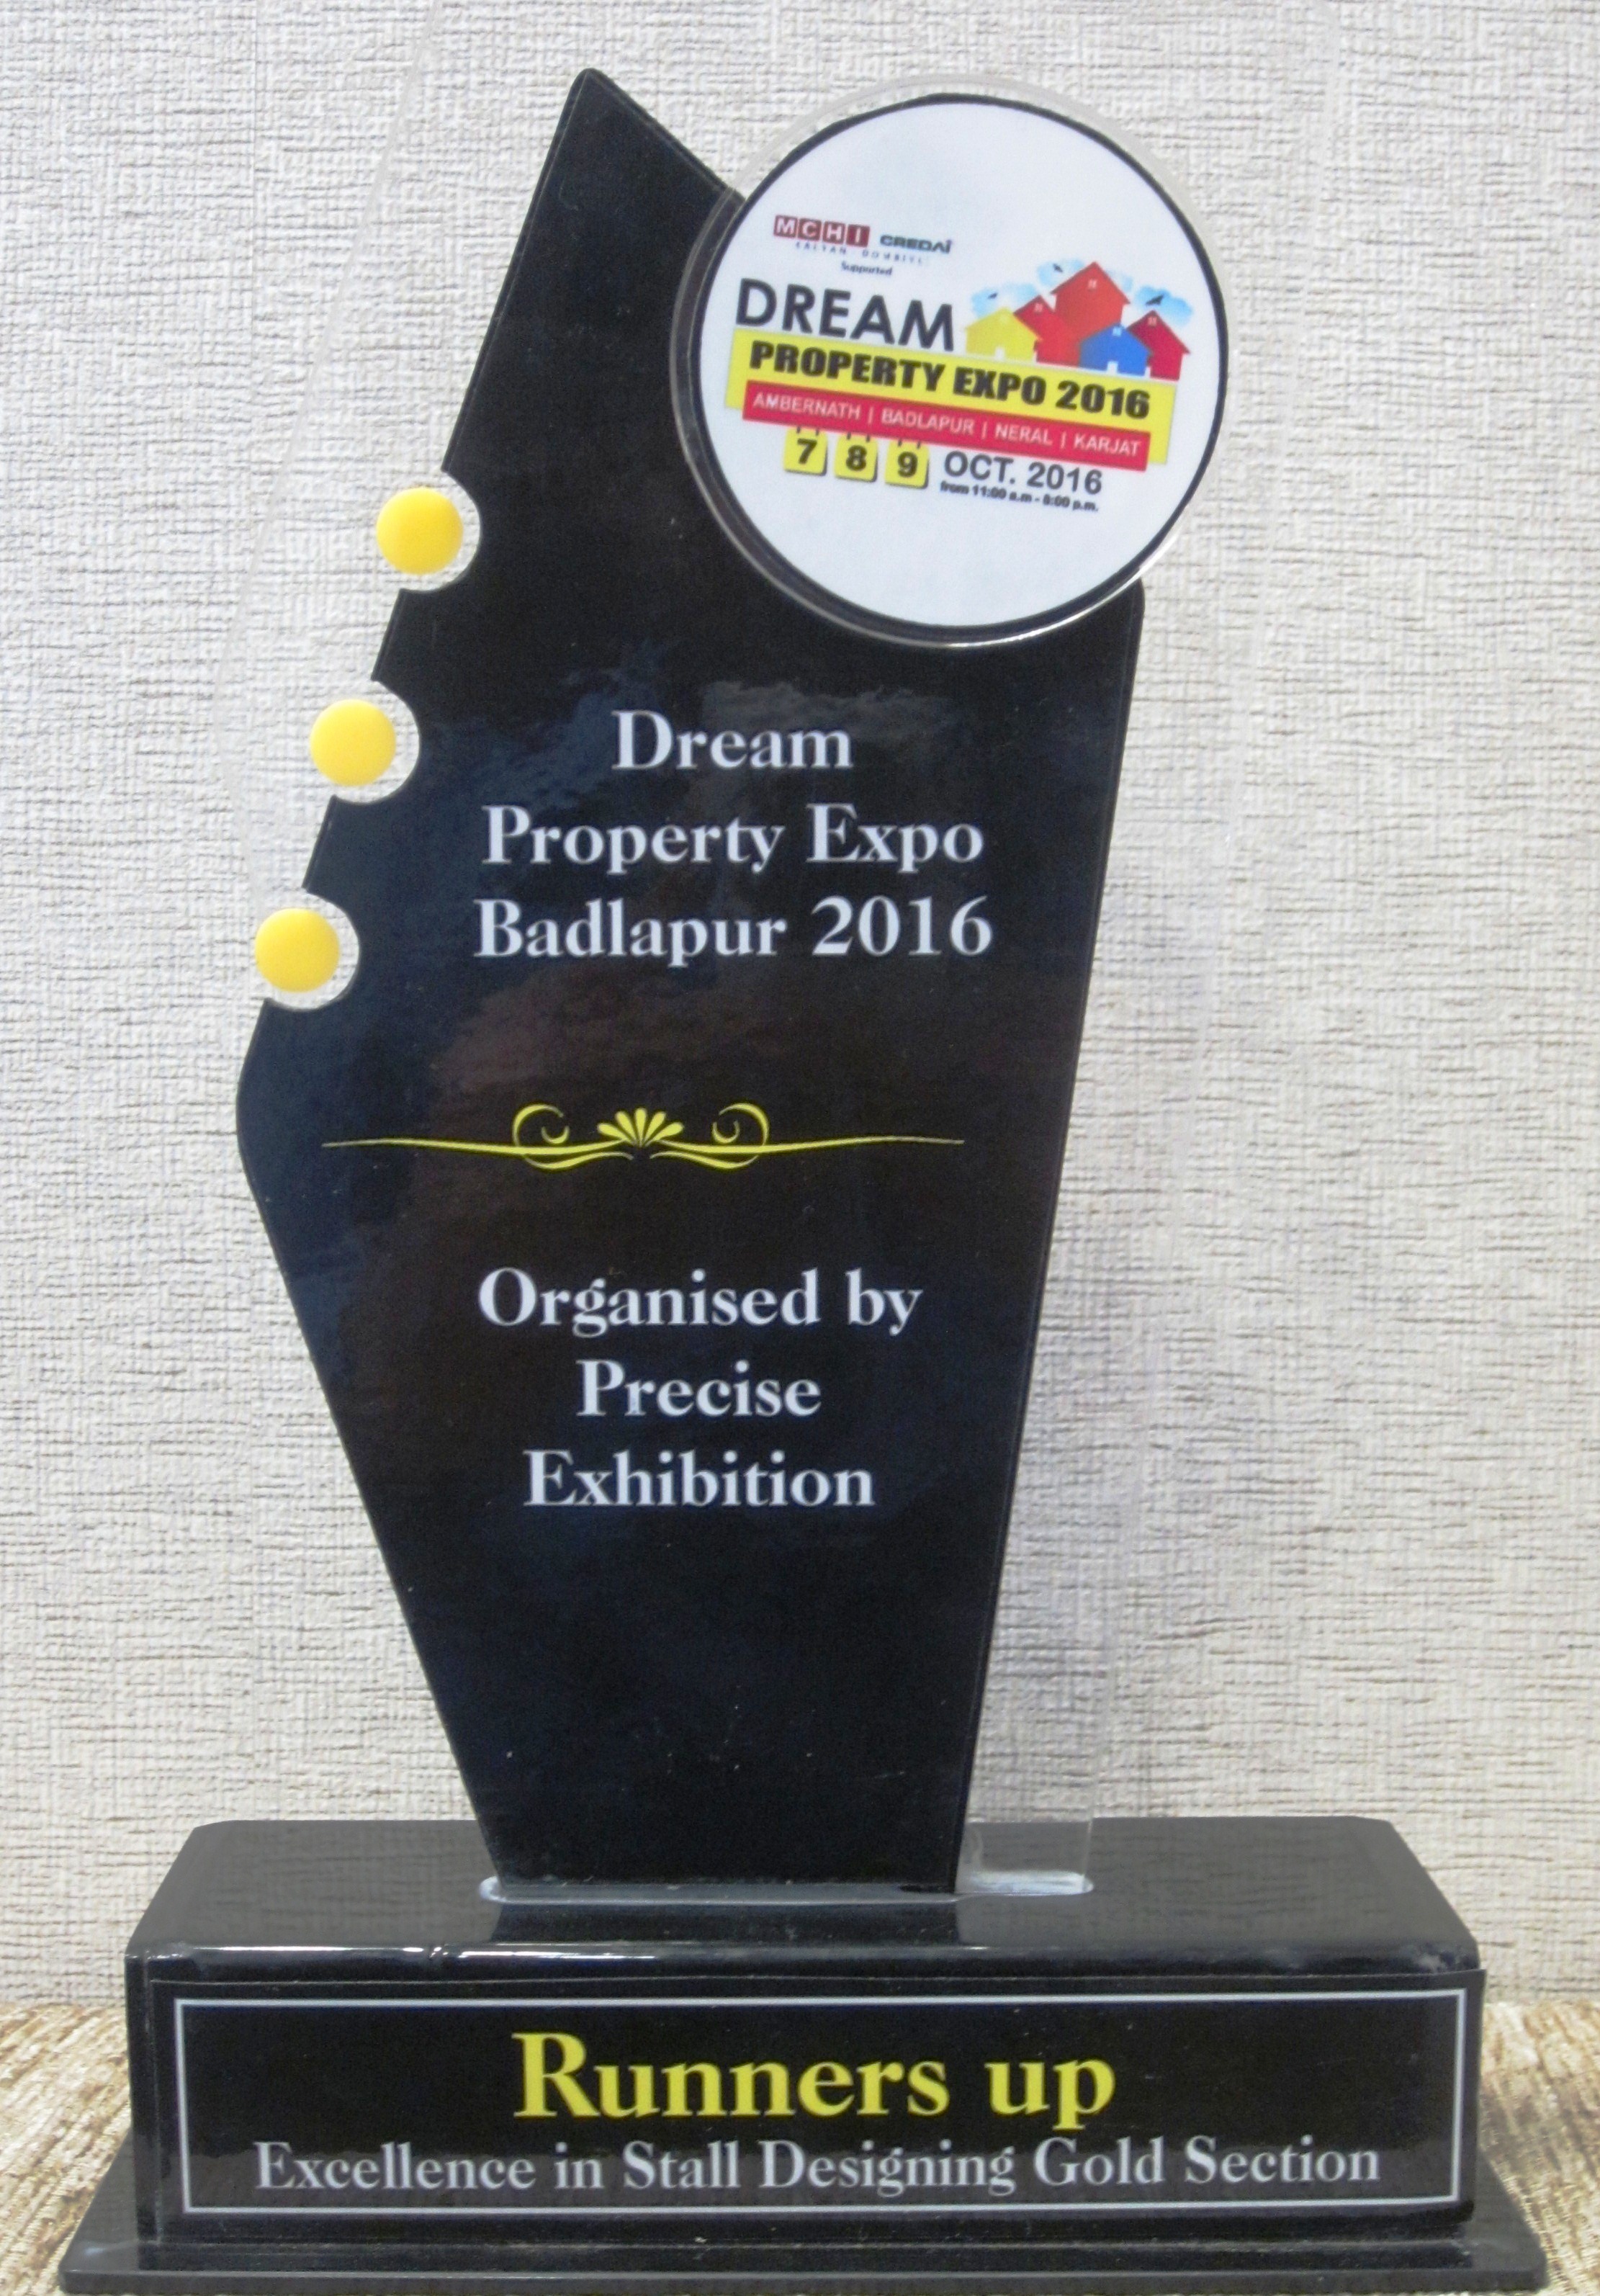 Vijay Group Stall
Designing Gold Section Excellence Award BY Precise Exhibition 2016